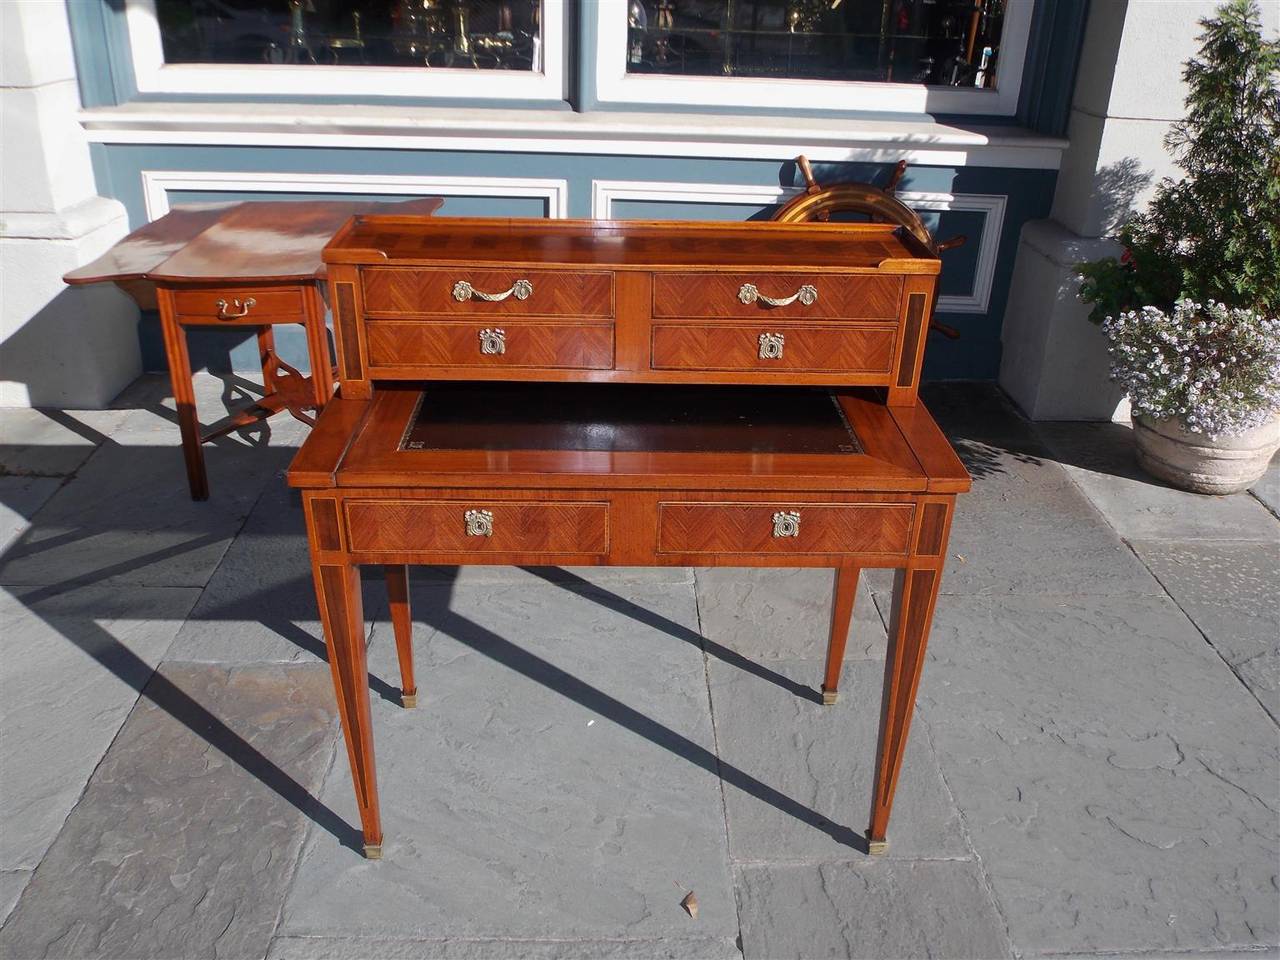 Italian inlaid marquetry leather top six-drawer writing desk with original ormolu brasses, terminating on tapered legs with brass cupped casters, Early 19th Century.